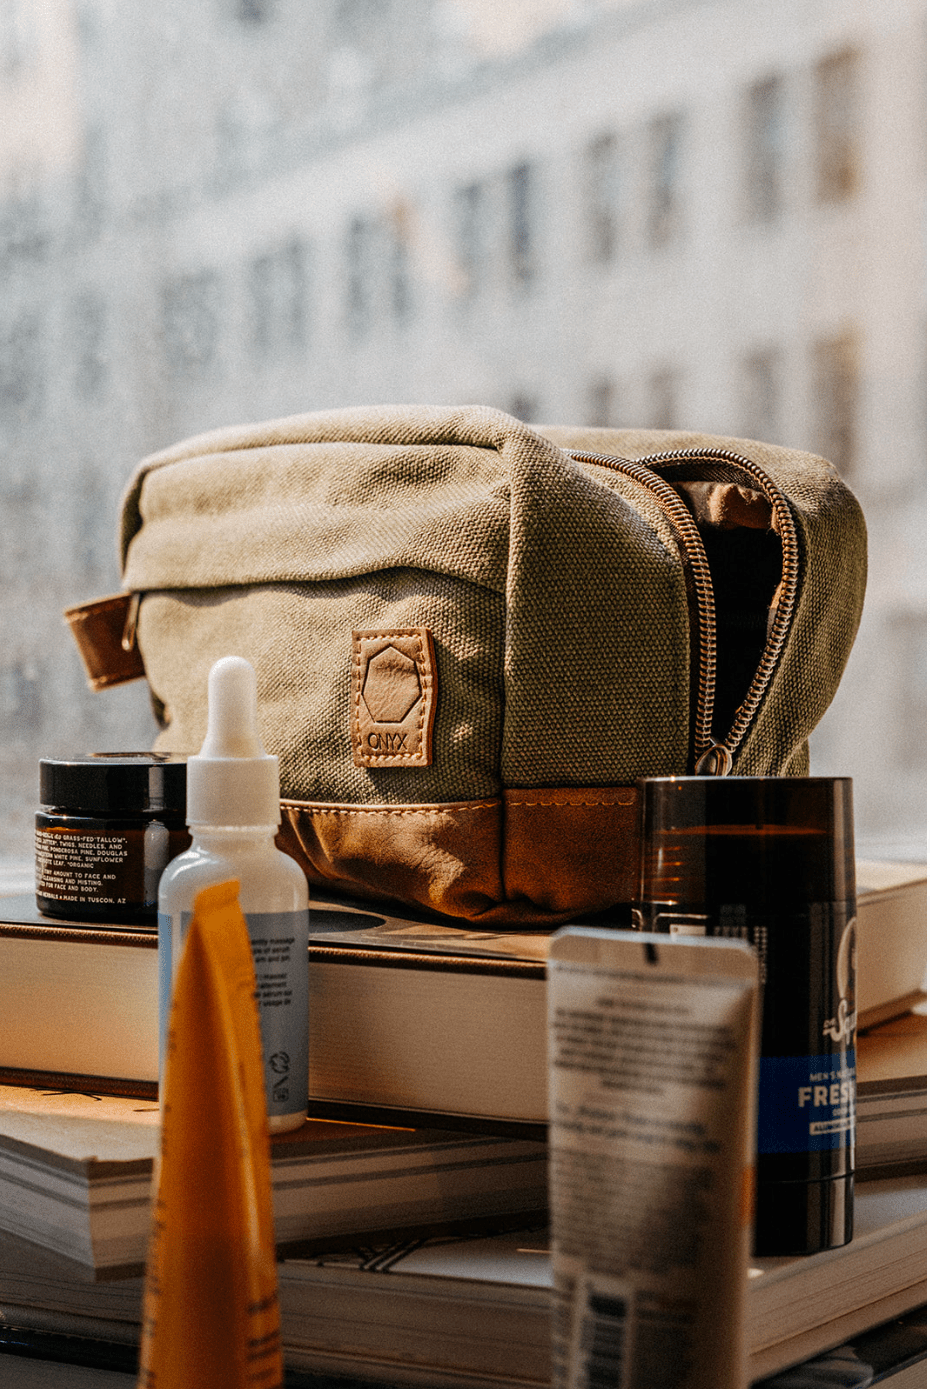 Mens Toiletry Bag - Travel Bag - Dopp kit - Shave Bag - Gift for Him - Birthday Gift Idea for Father